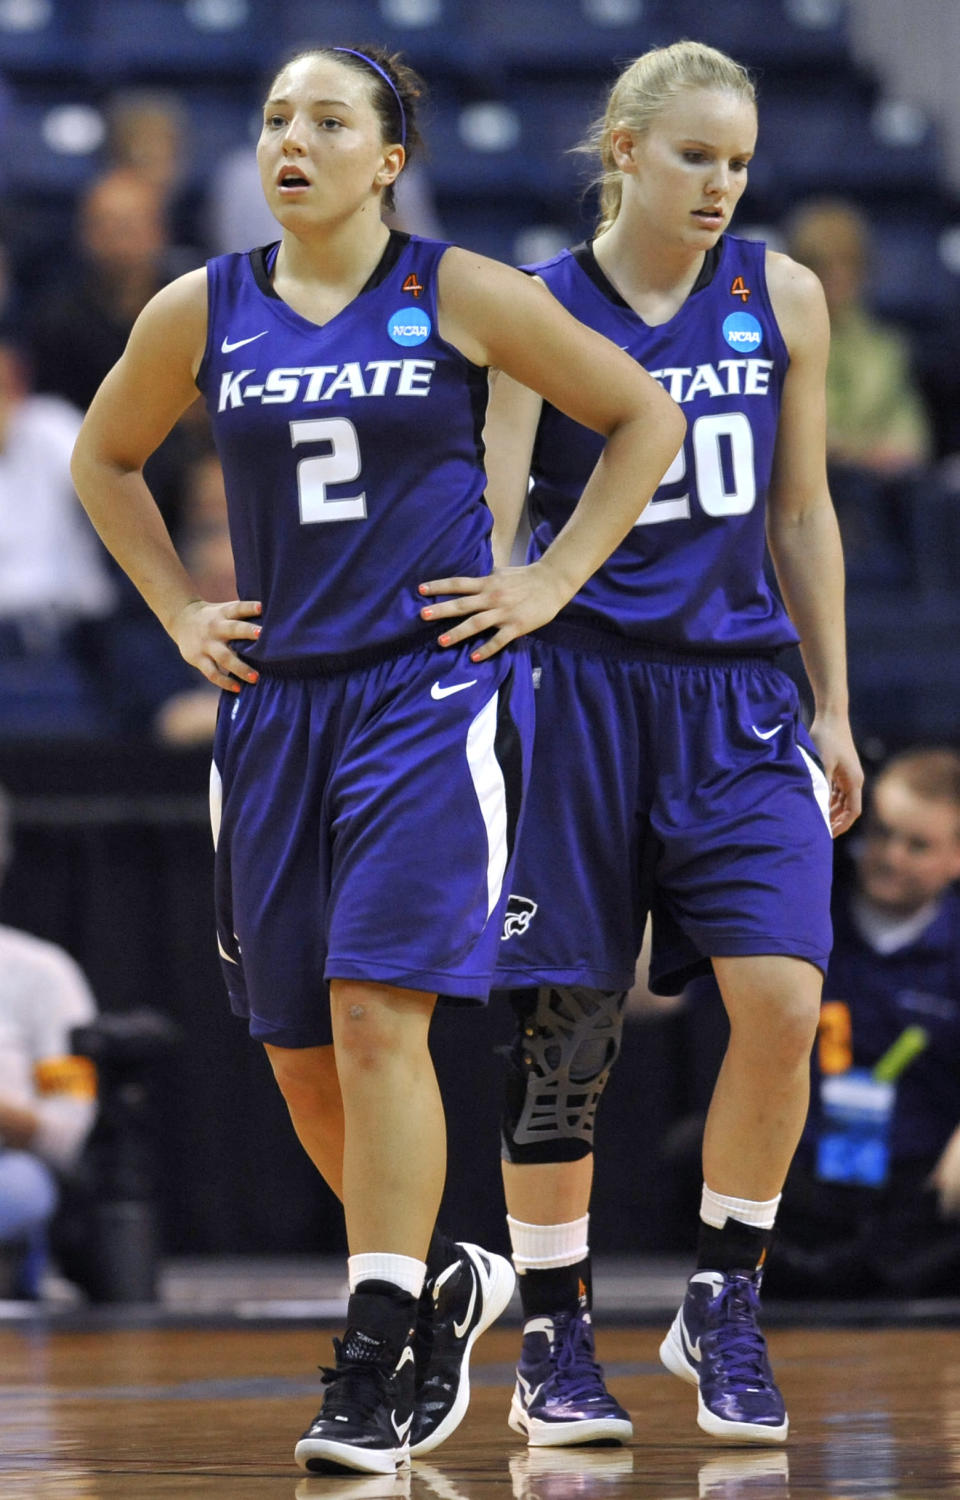 Kansas State's Brittany Chambers, left, and Emma Ostermann, right, react late in the second half of an NCAA tournament second-round college basketball game in Bridgeport, Conn., Monday, March 19, 2012. Connecticut won 72-26. (AP Photo/Jessica Hill)